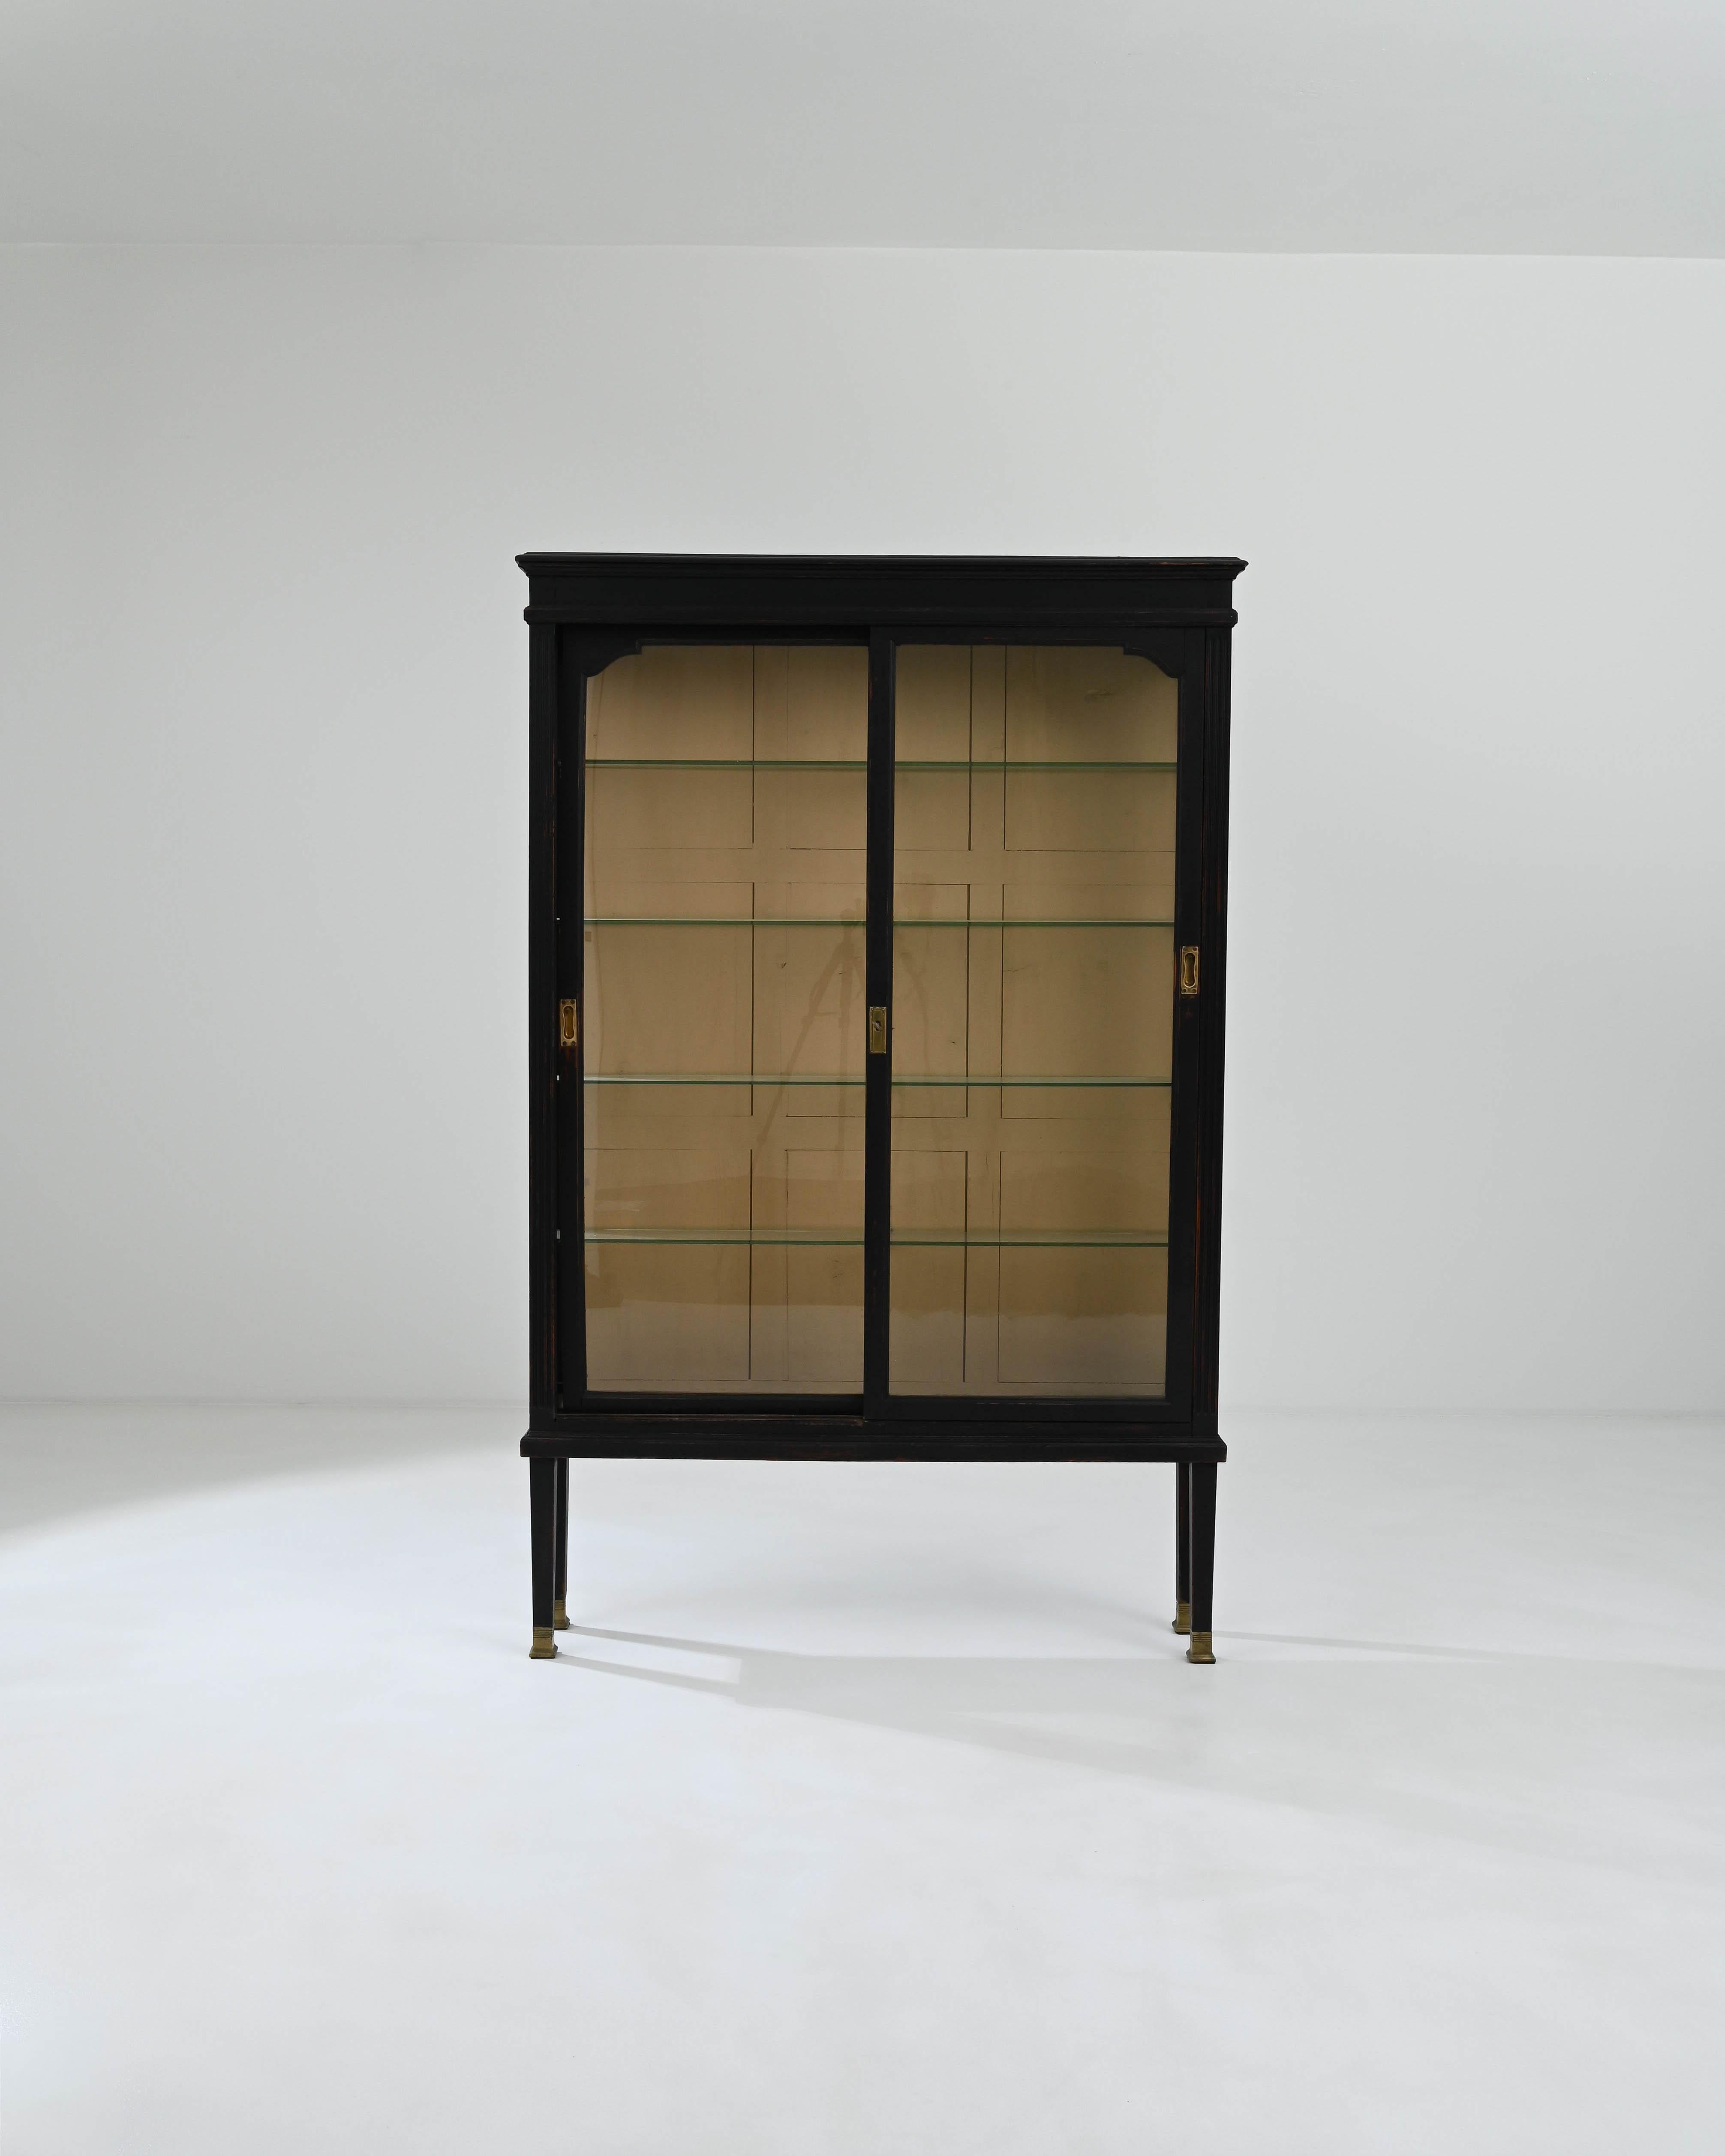 The graceful form and attractive patina of this vintage wooden vitrine make it an ideal display case for precious objects. Built in France in the early 20th century, the design incorporates the stylish simplicity of Modernist design with the elegant